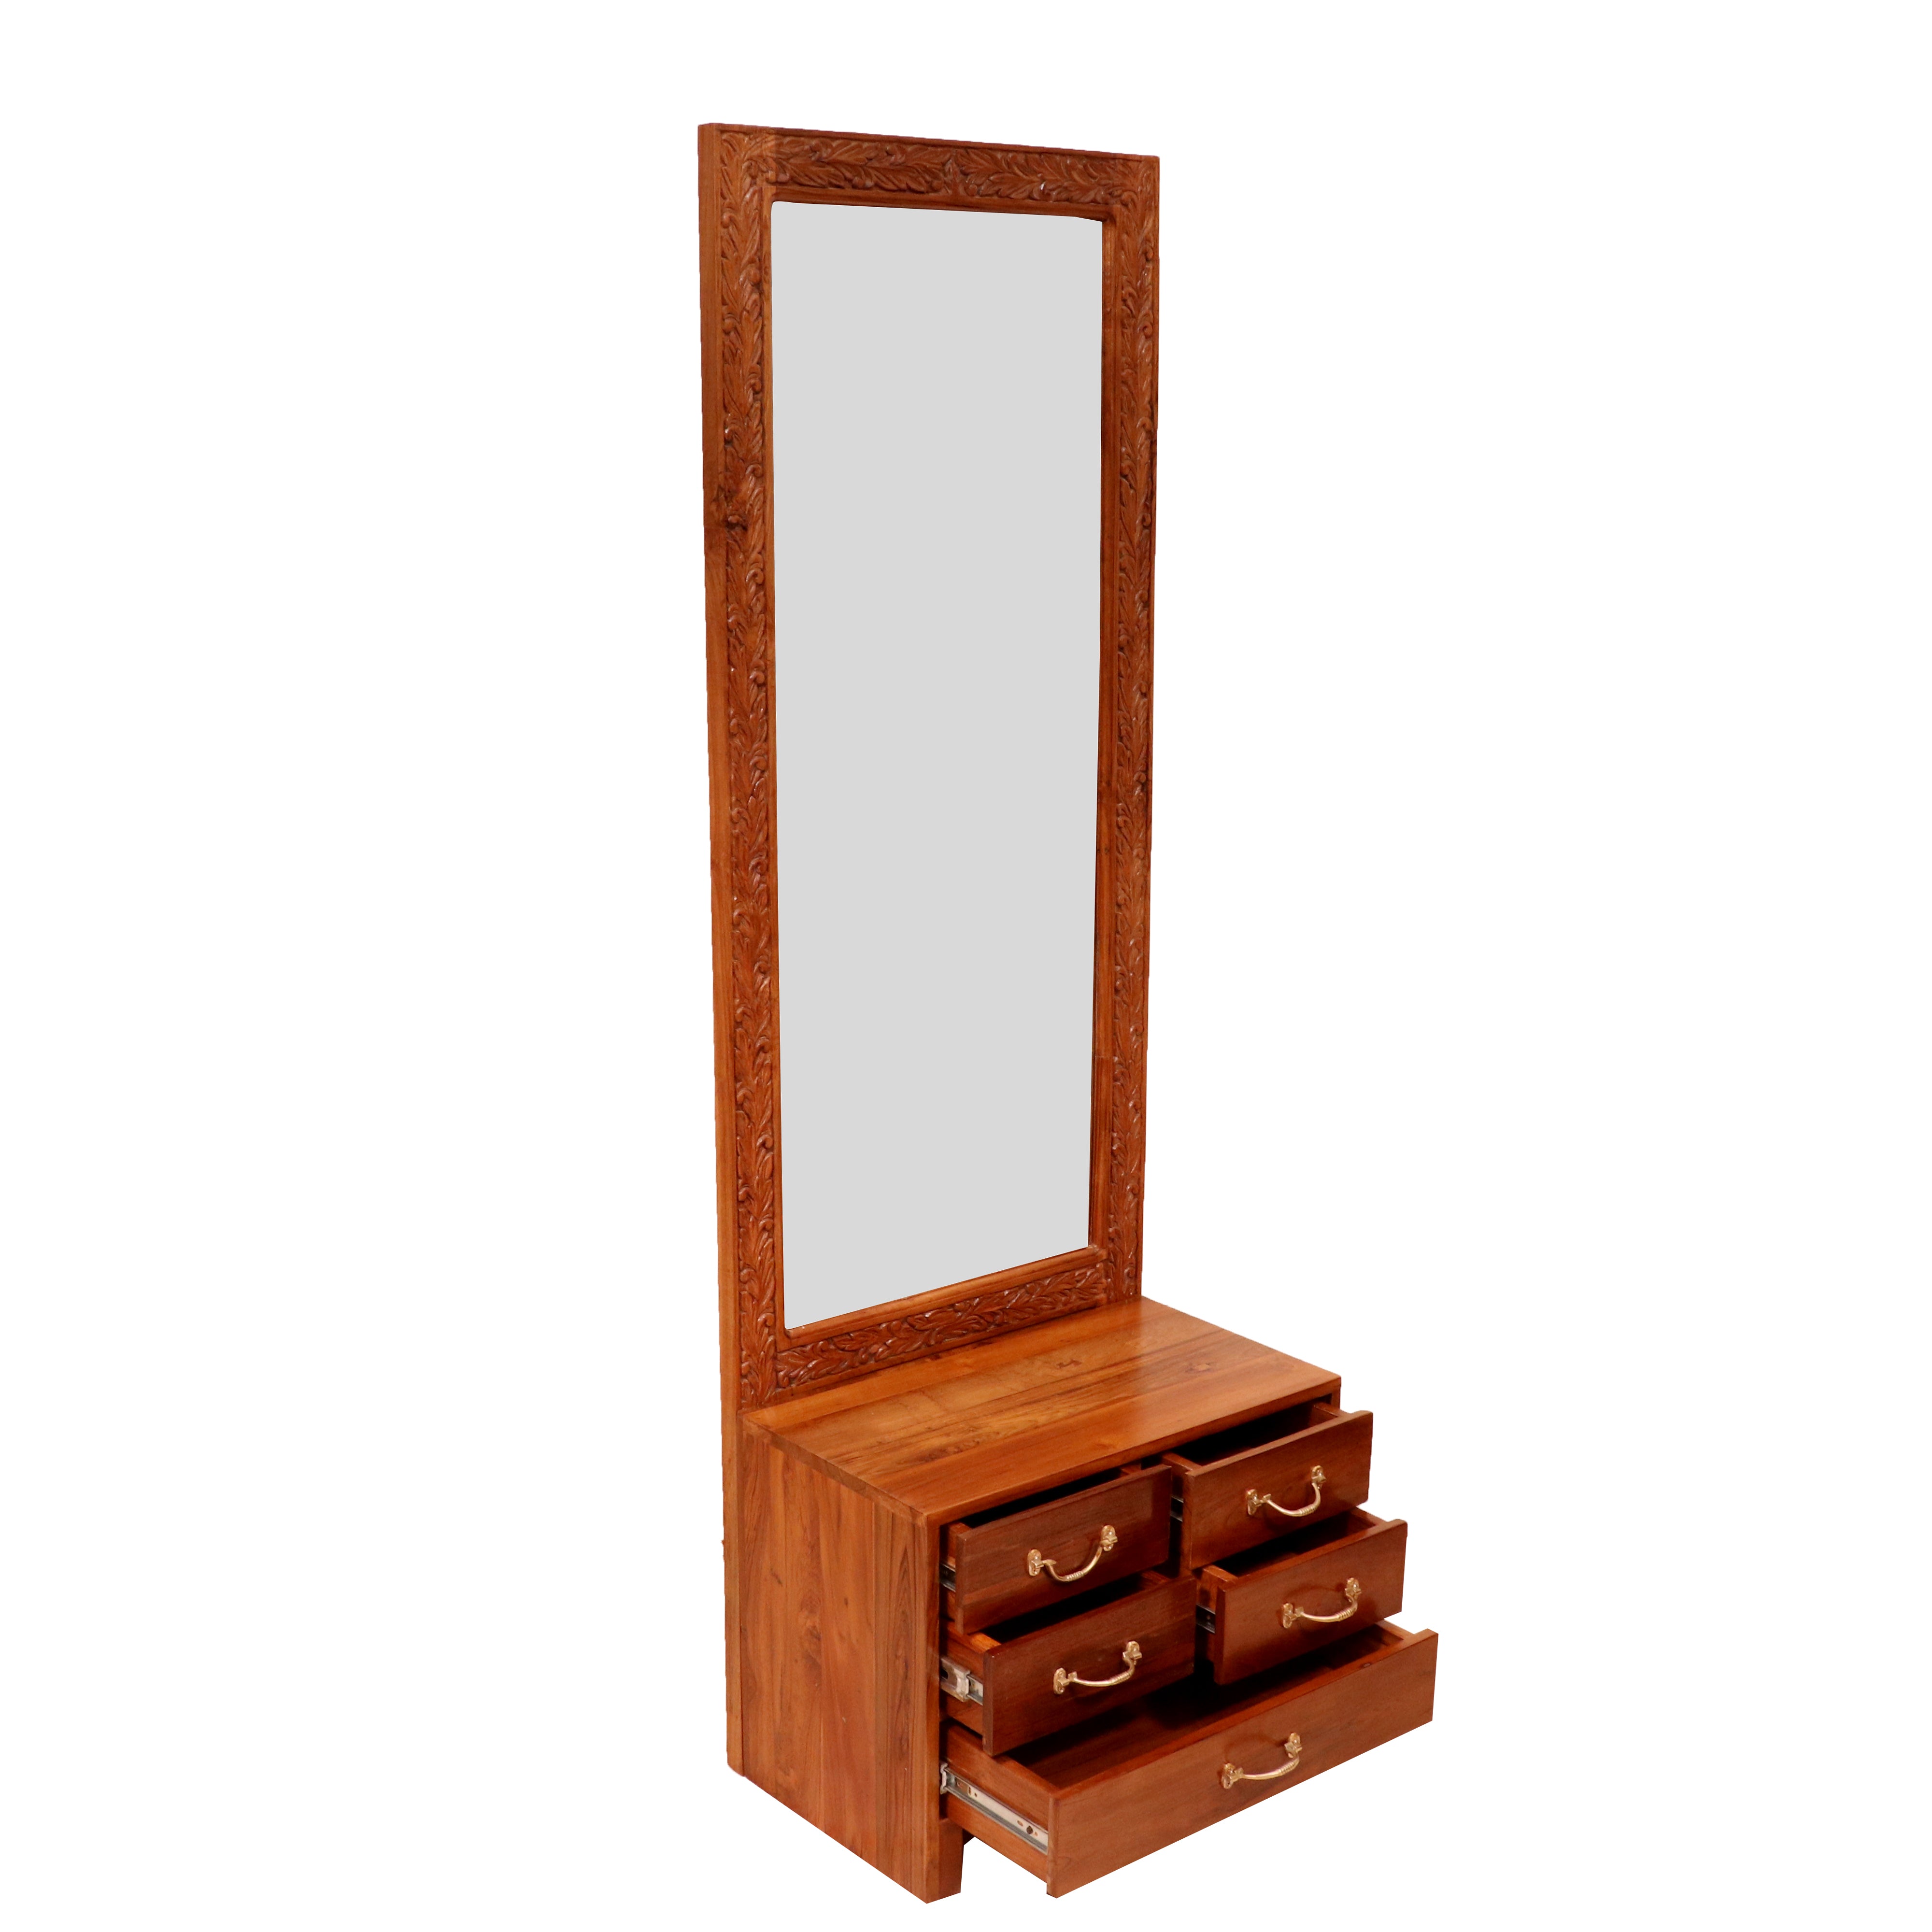 Dressing Tables Under 5000: Buy Dressing Tables Under 50000 Online in India  from Ouch Cart